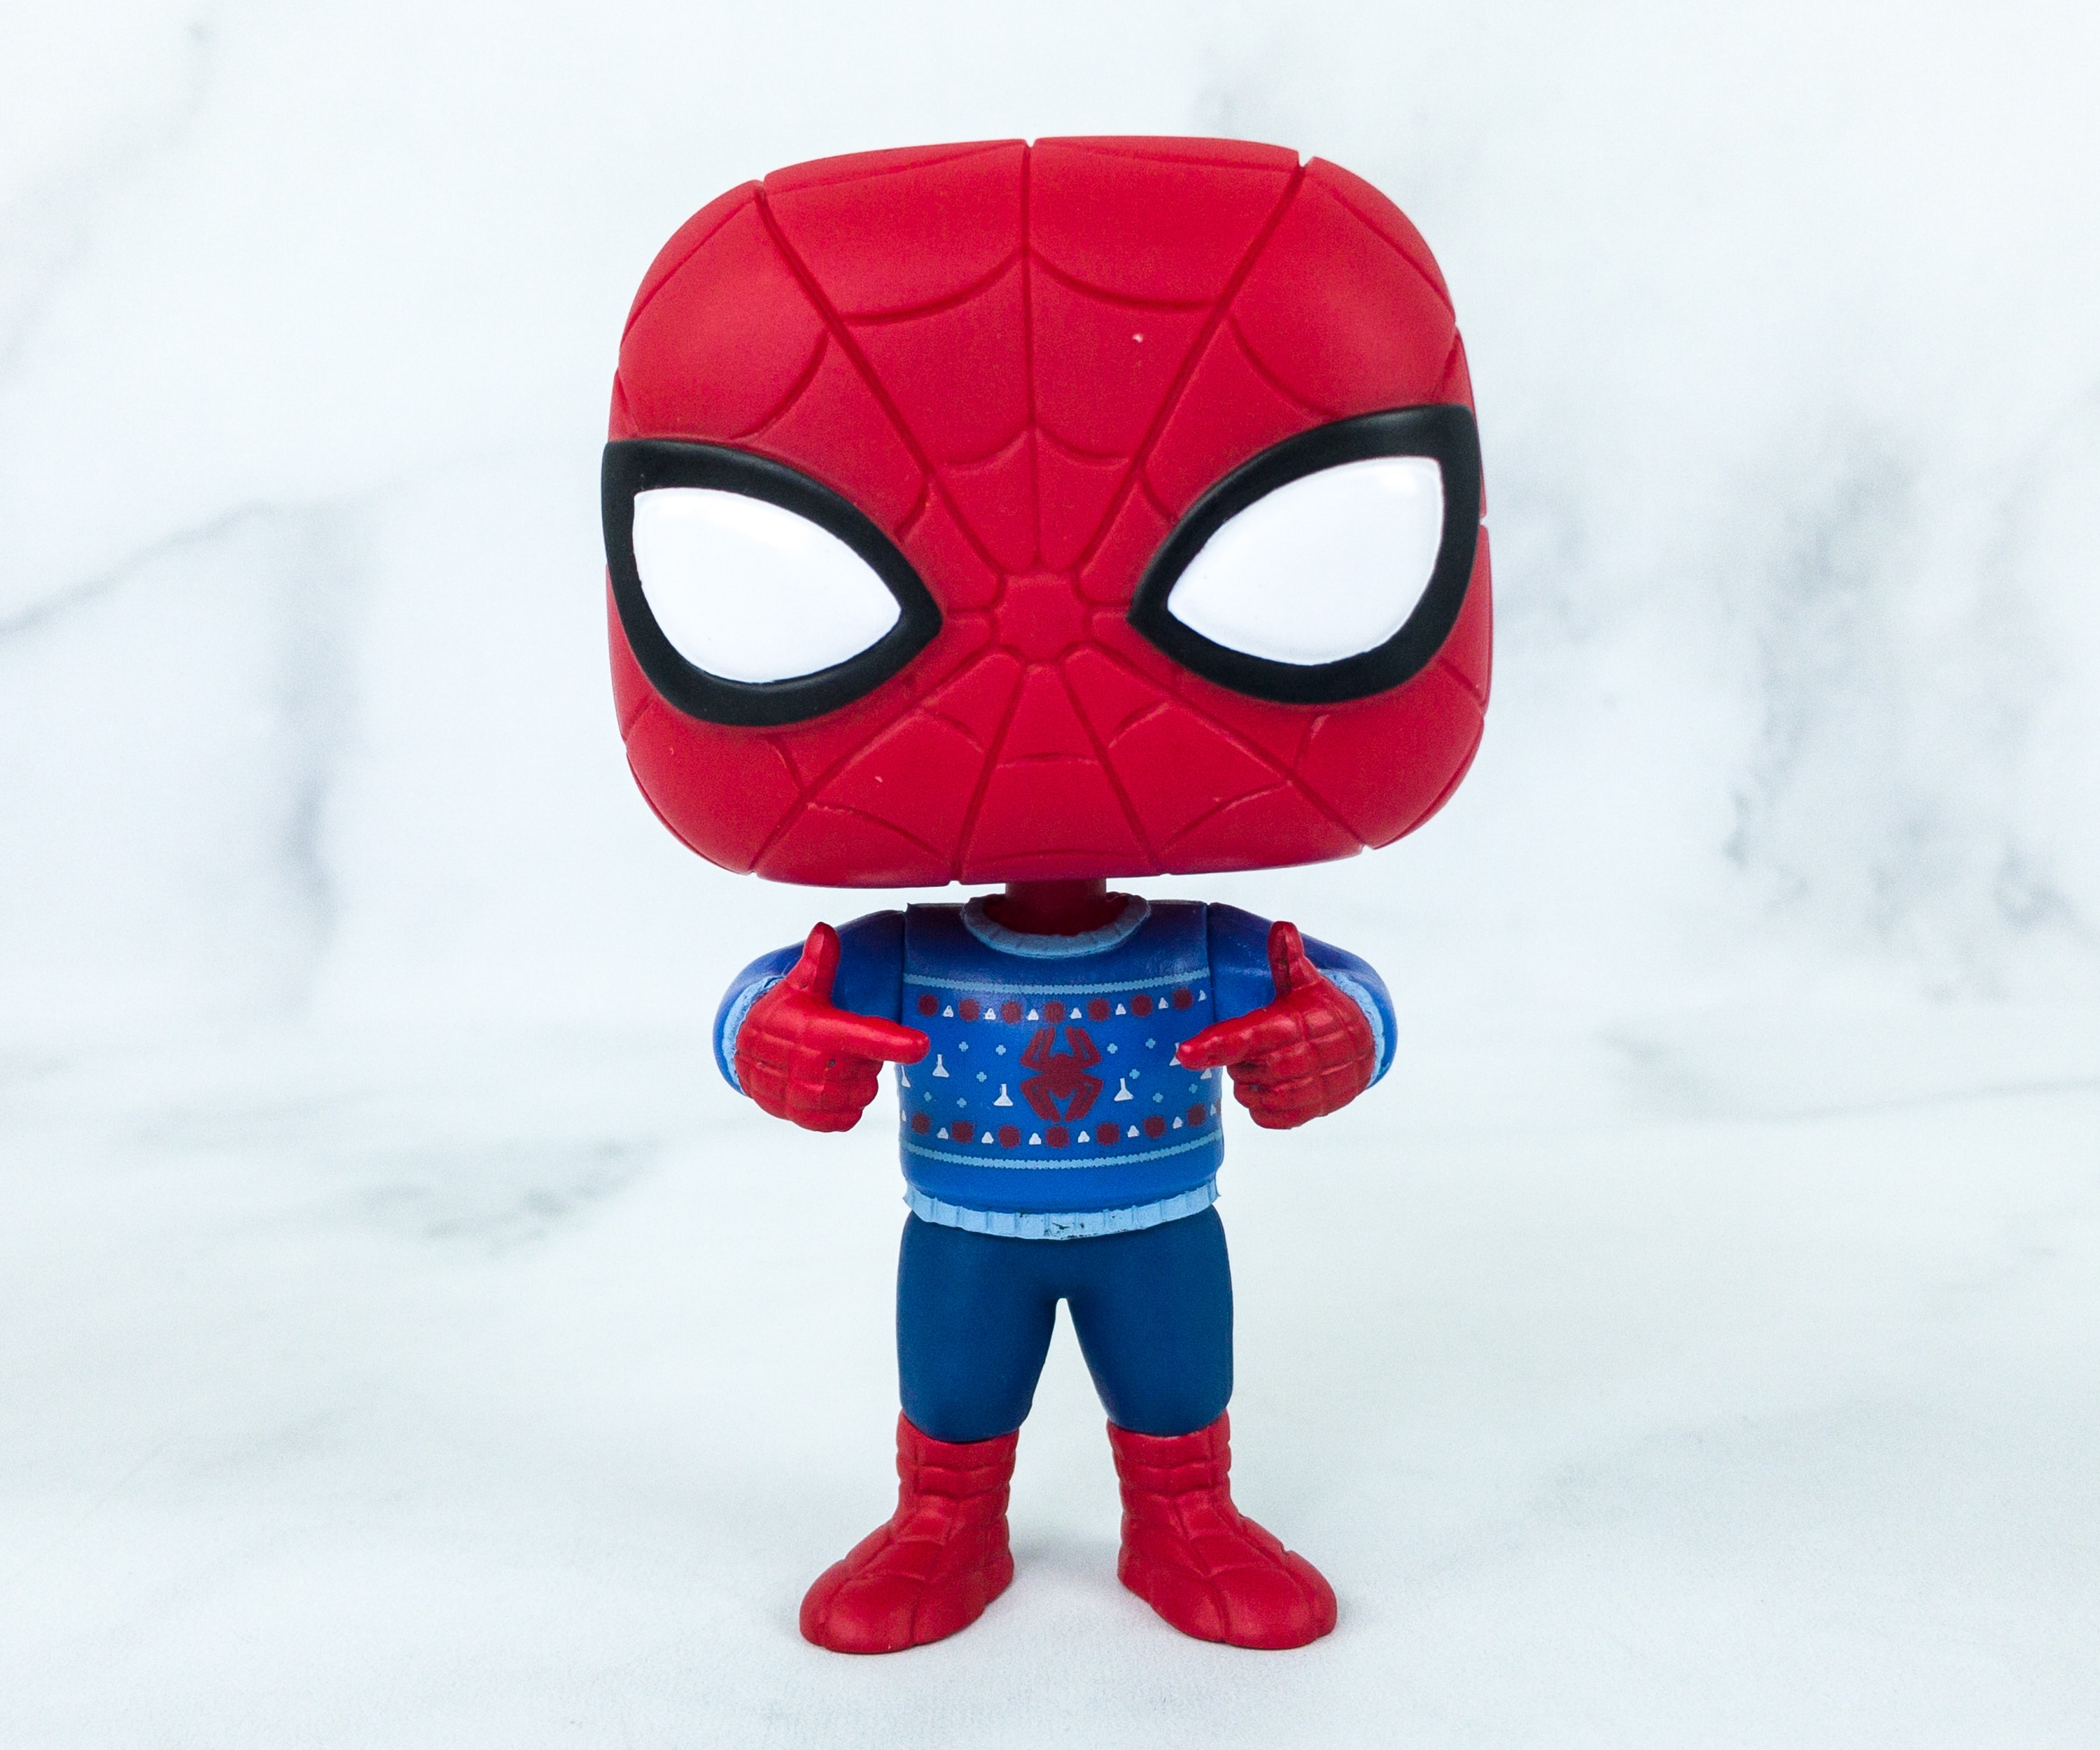 Pop In A Box July 2019 Funko Subscription Box Review ...